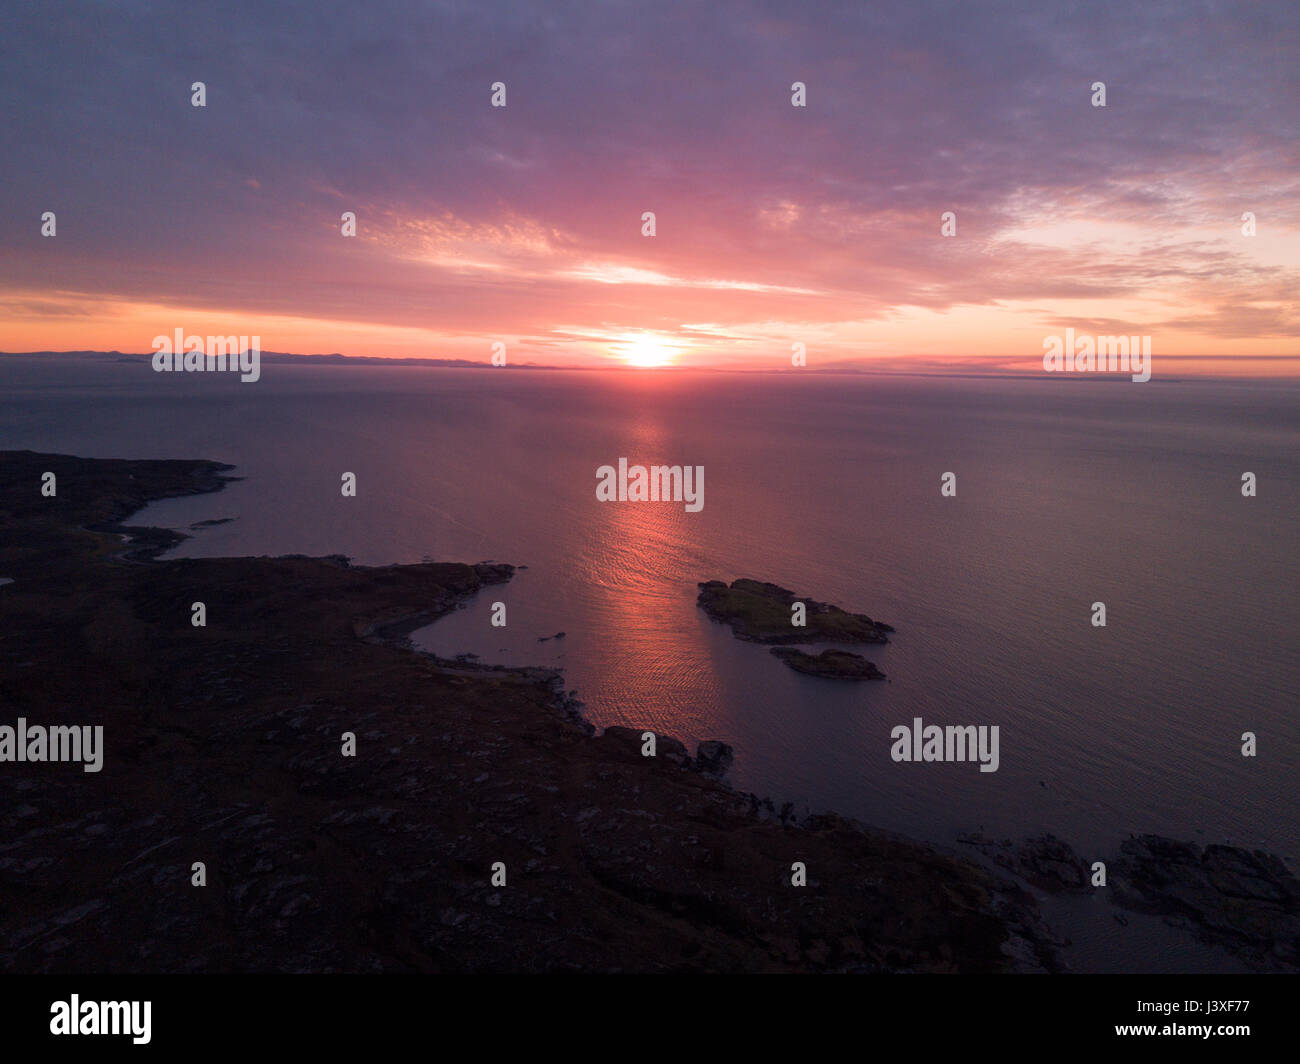 Aerial view of sunset over the Scottish Highlands near Poolewe looking out over the Atlantic ocean Stock Photo